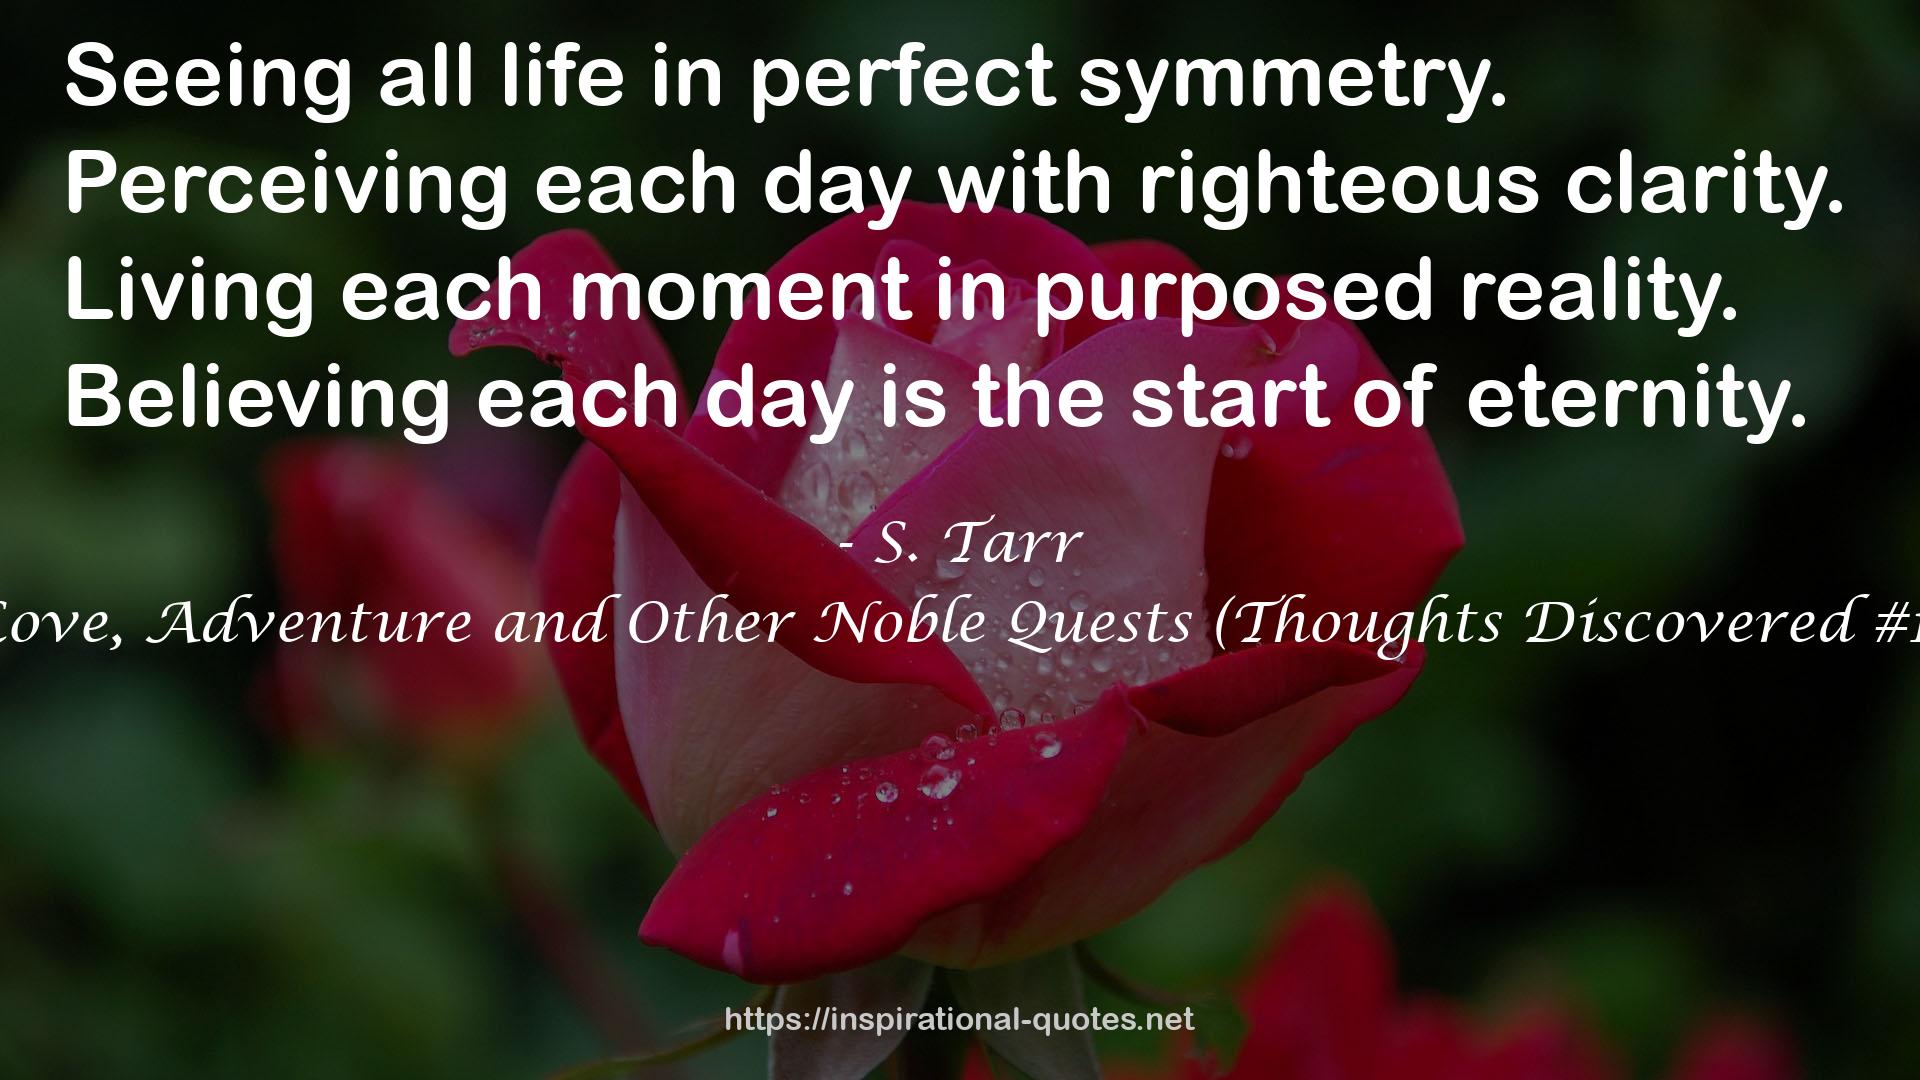 S. Tarr QUOTES